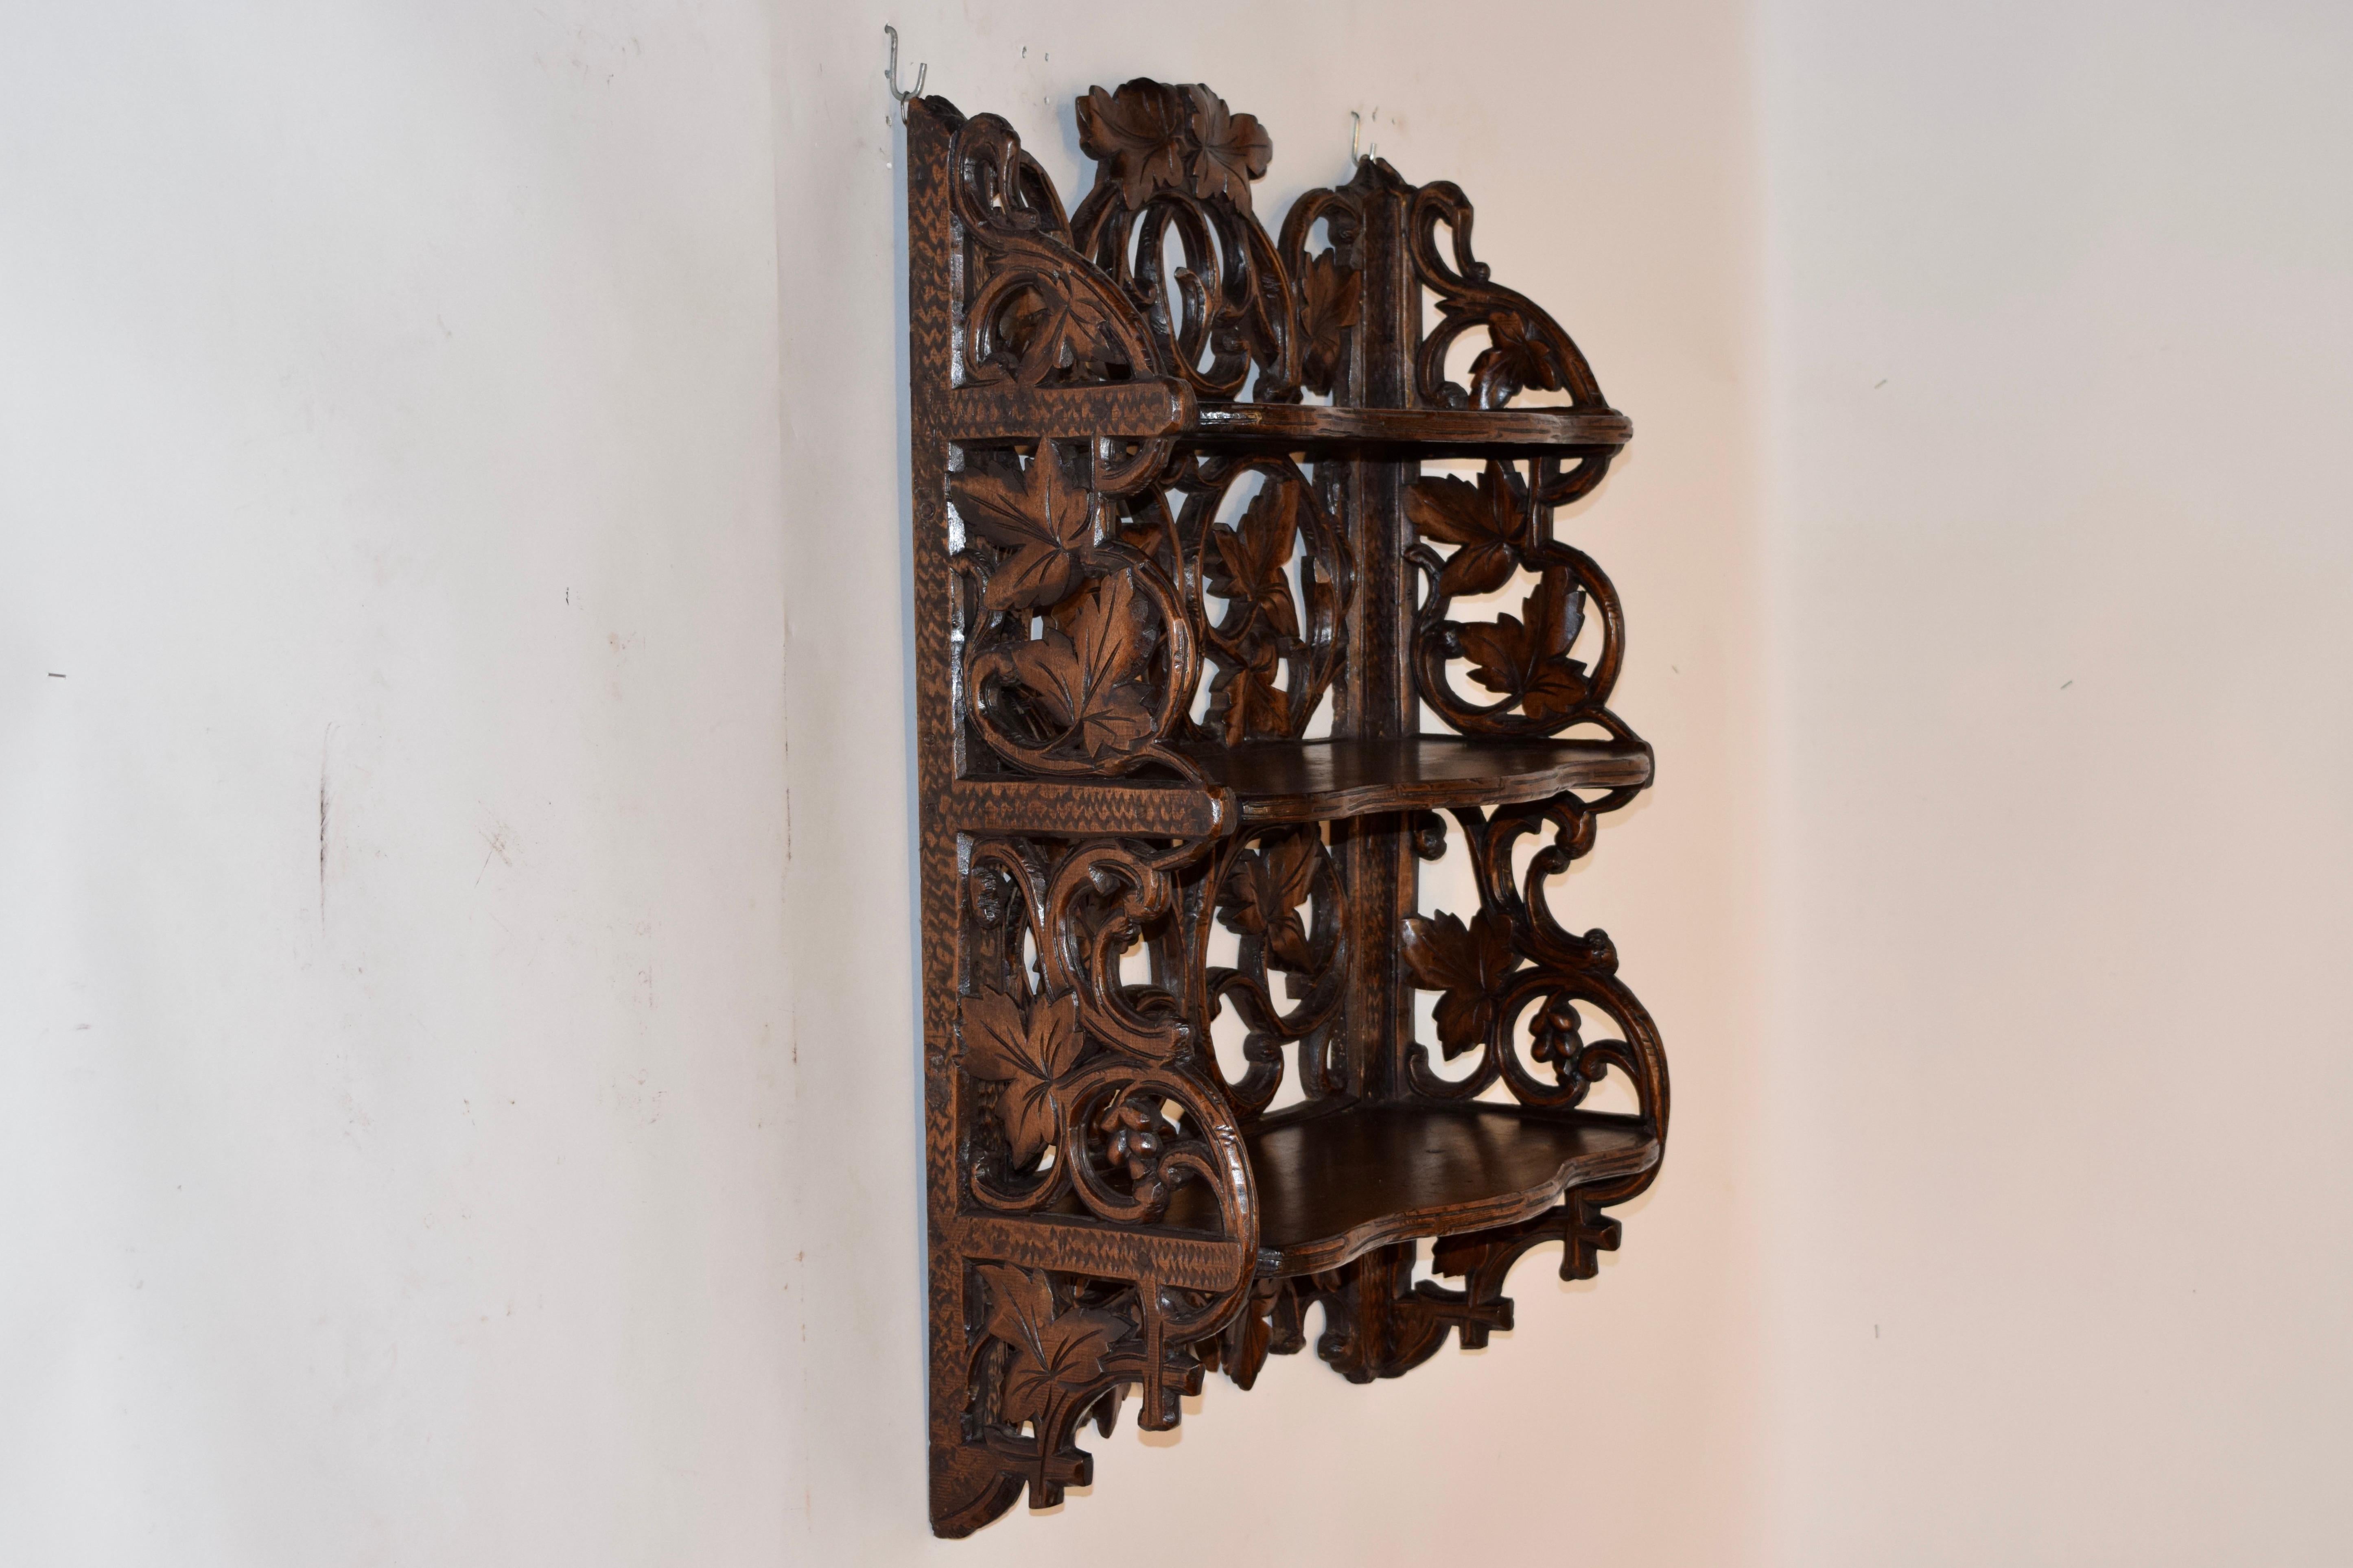 19th century Black Forest hand carved wall shelf from Switzerland with three shelves, all with hand carved faux bois decoration on the fronts of the shelves. The back of the shelf is highly carved with branches and leaves, and the sides of the shelf